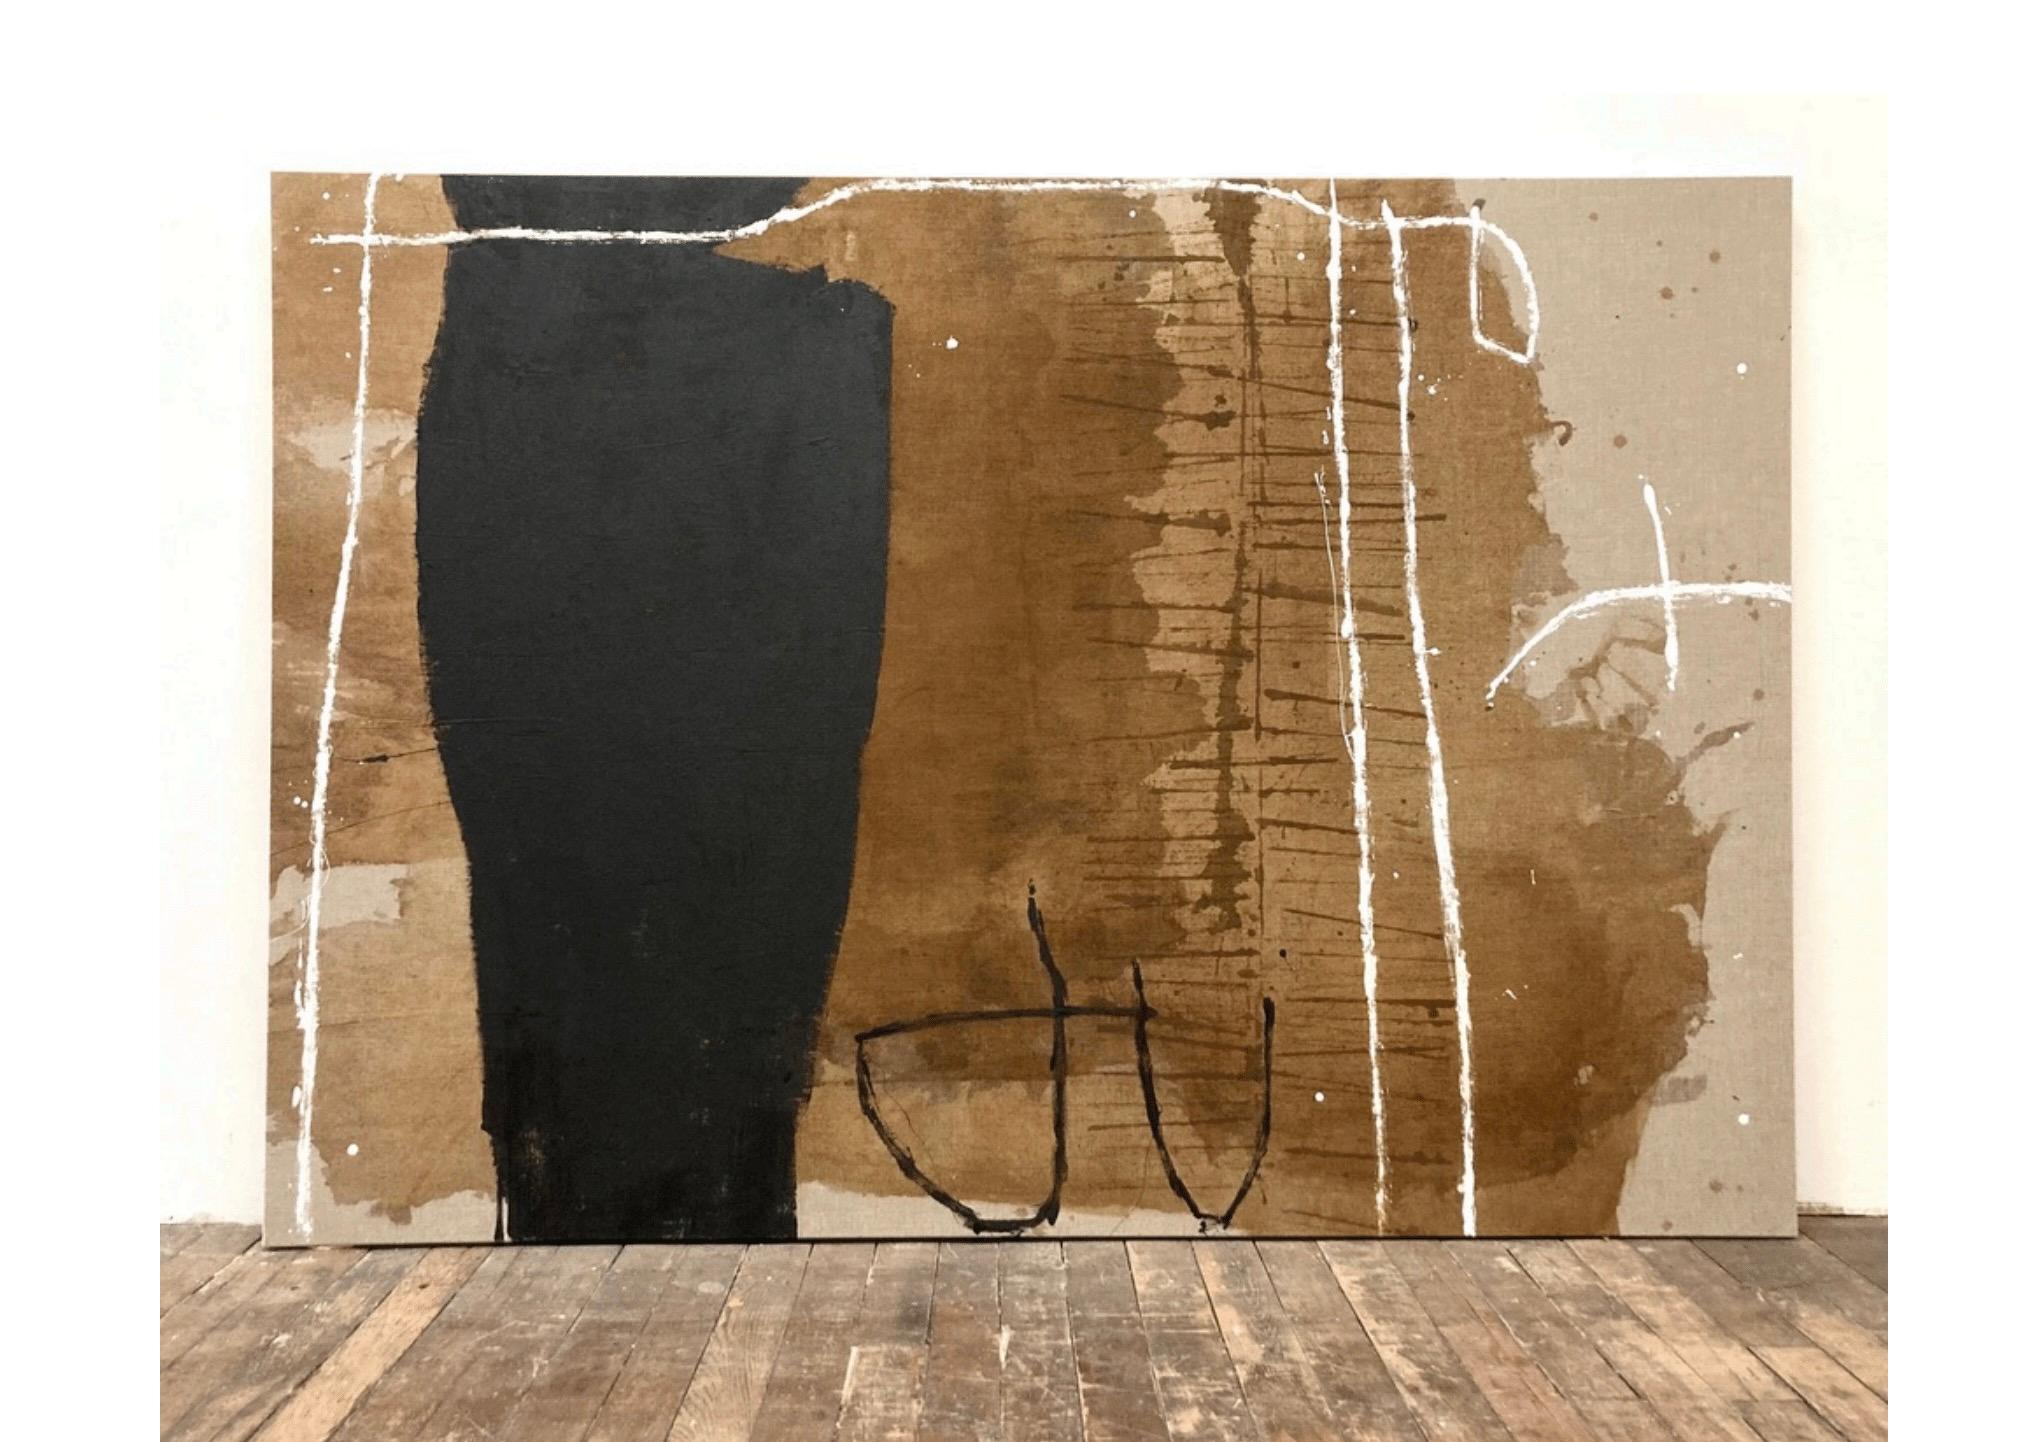 Untitled, 2021 by Meighan Morrison is a large abstract acrylic and ink painting in shades of brown, black and white on linen self wrapped around the stretcher. Bold shapes and gestural, calligraphic strokes create a unique aesthetic of powerful,